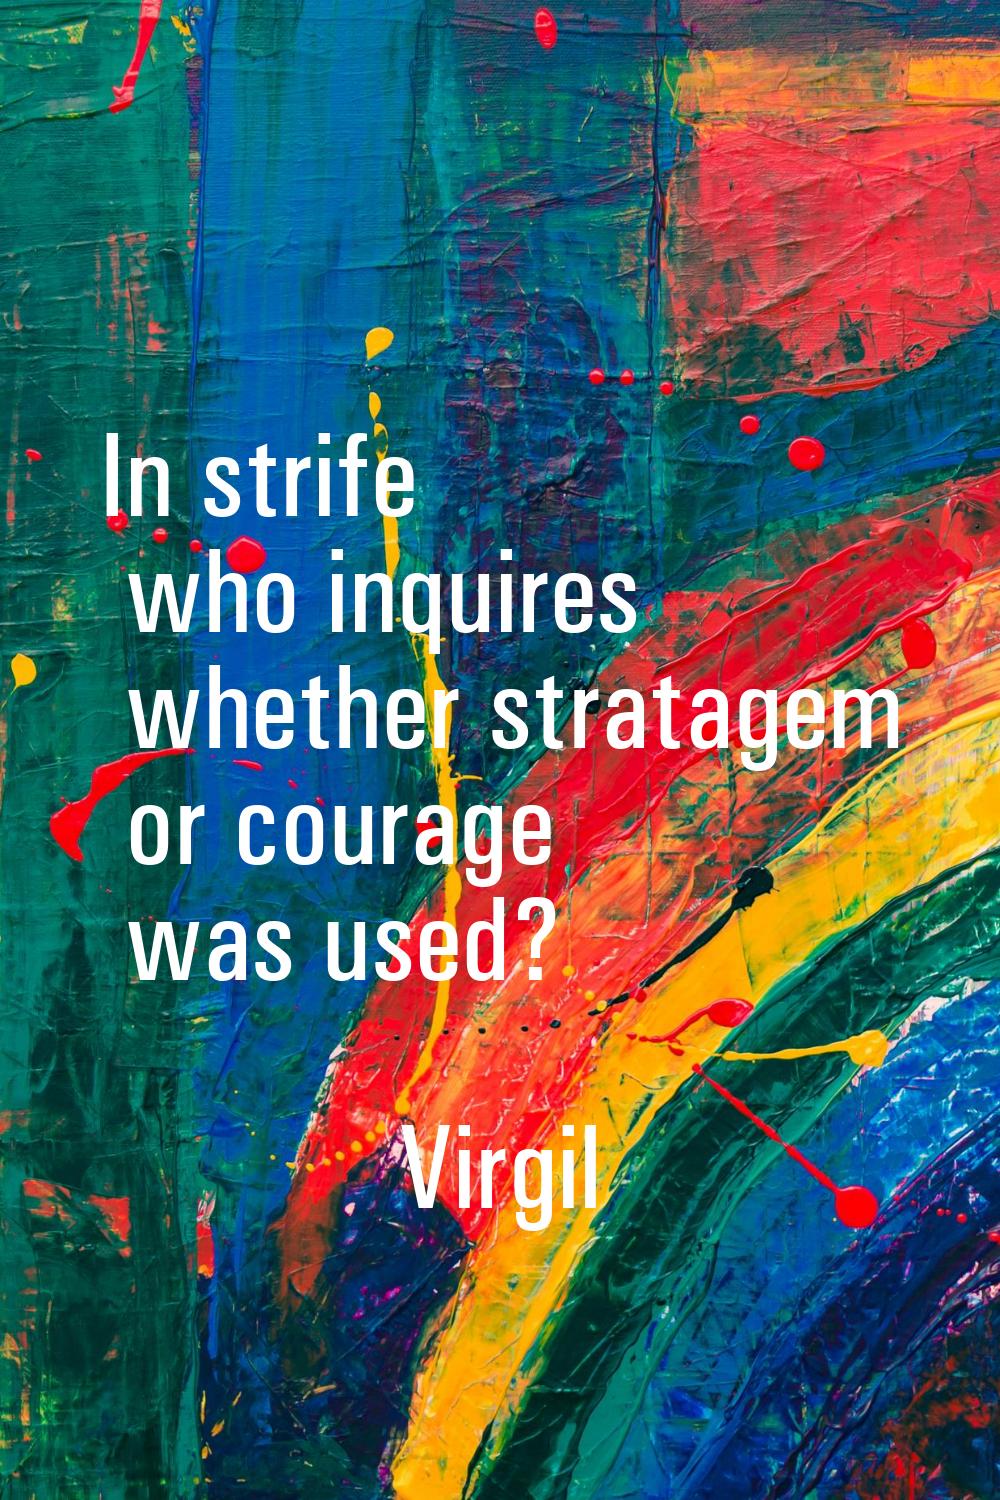 In strife who inquires whether stratagem or courage was used?